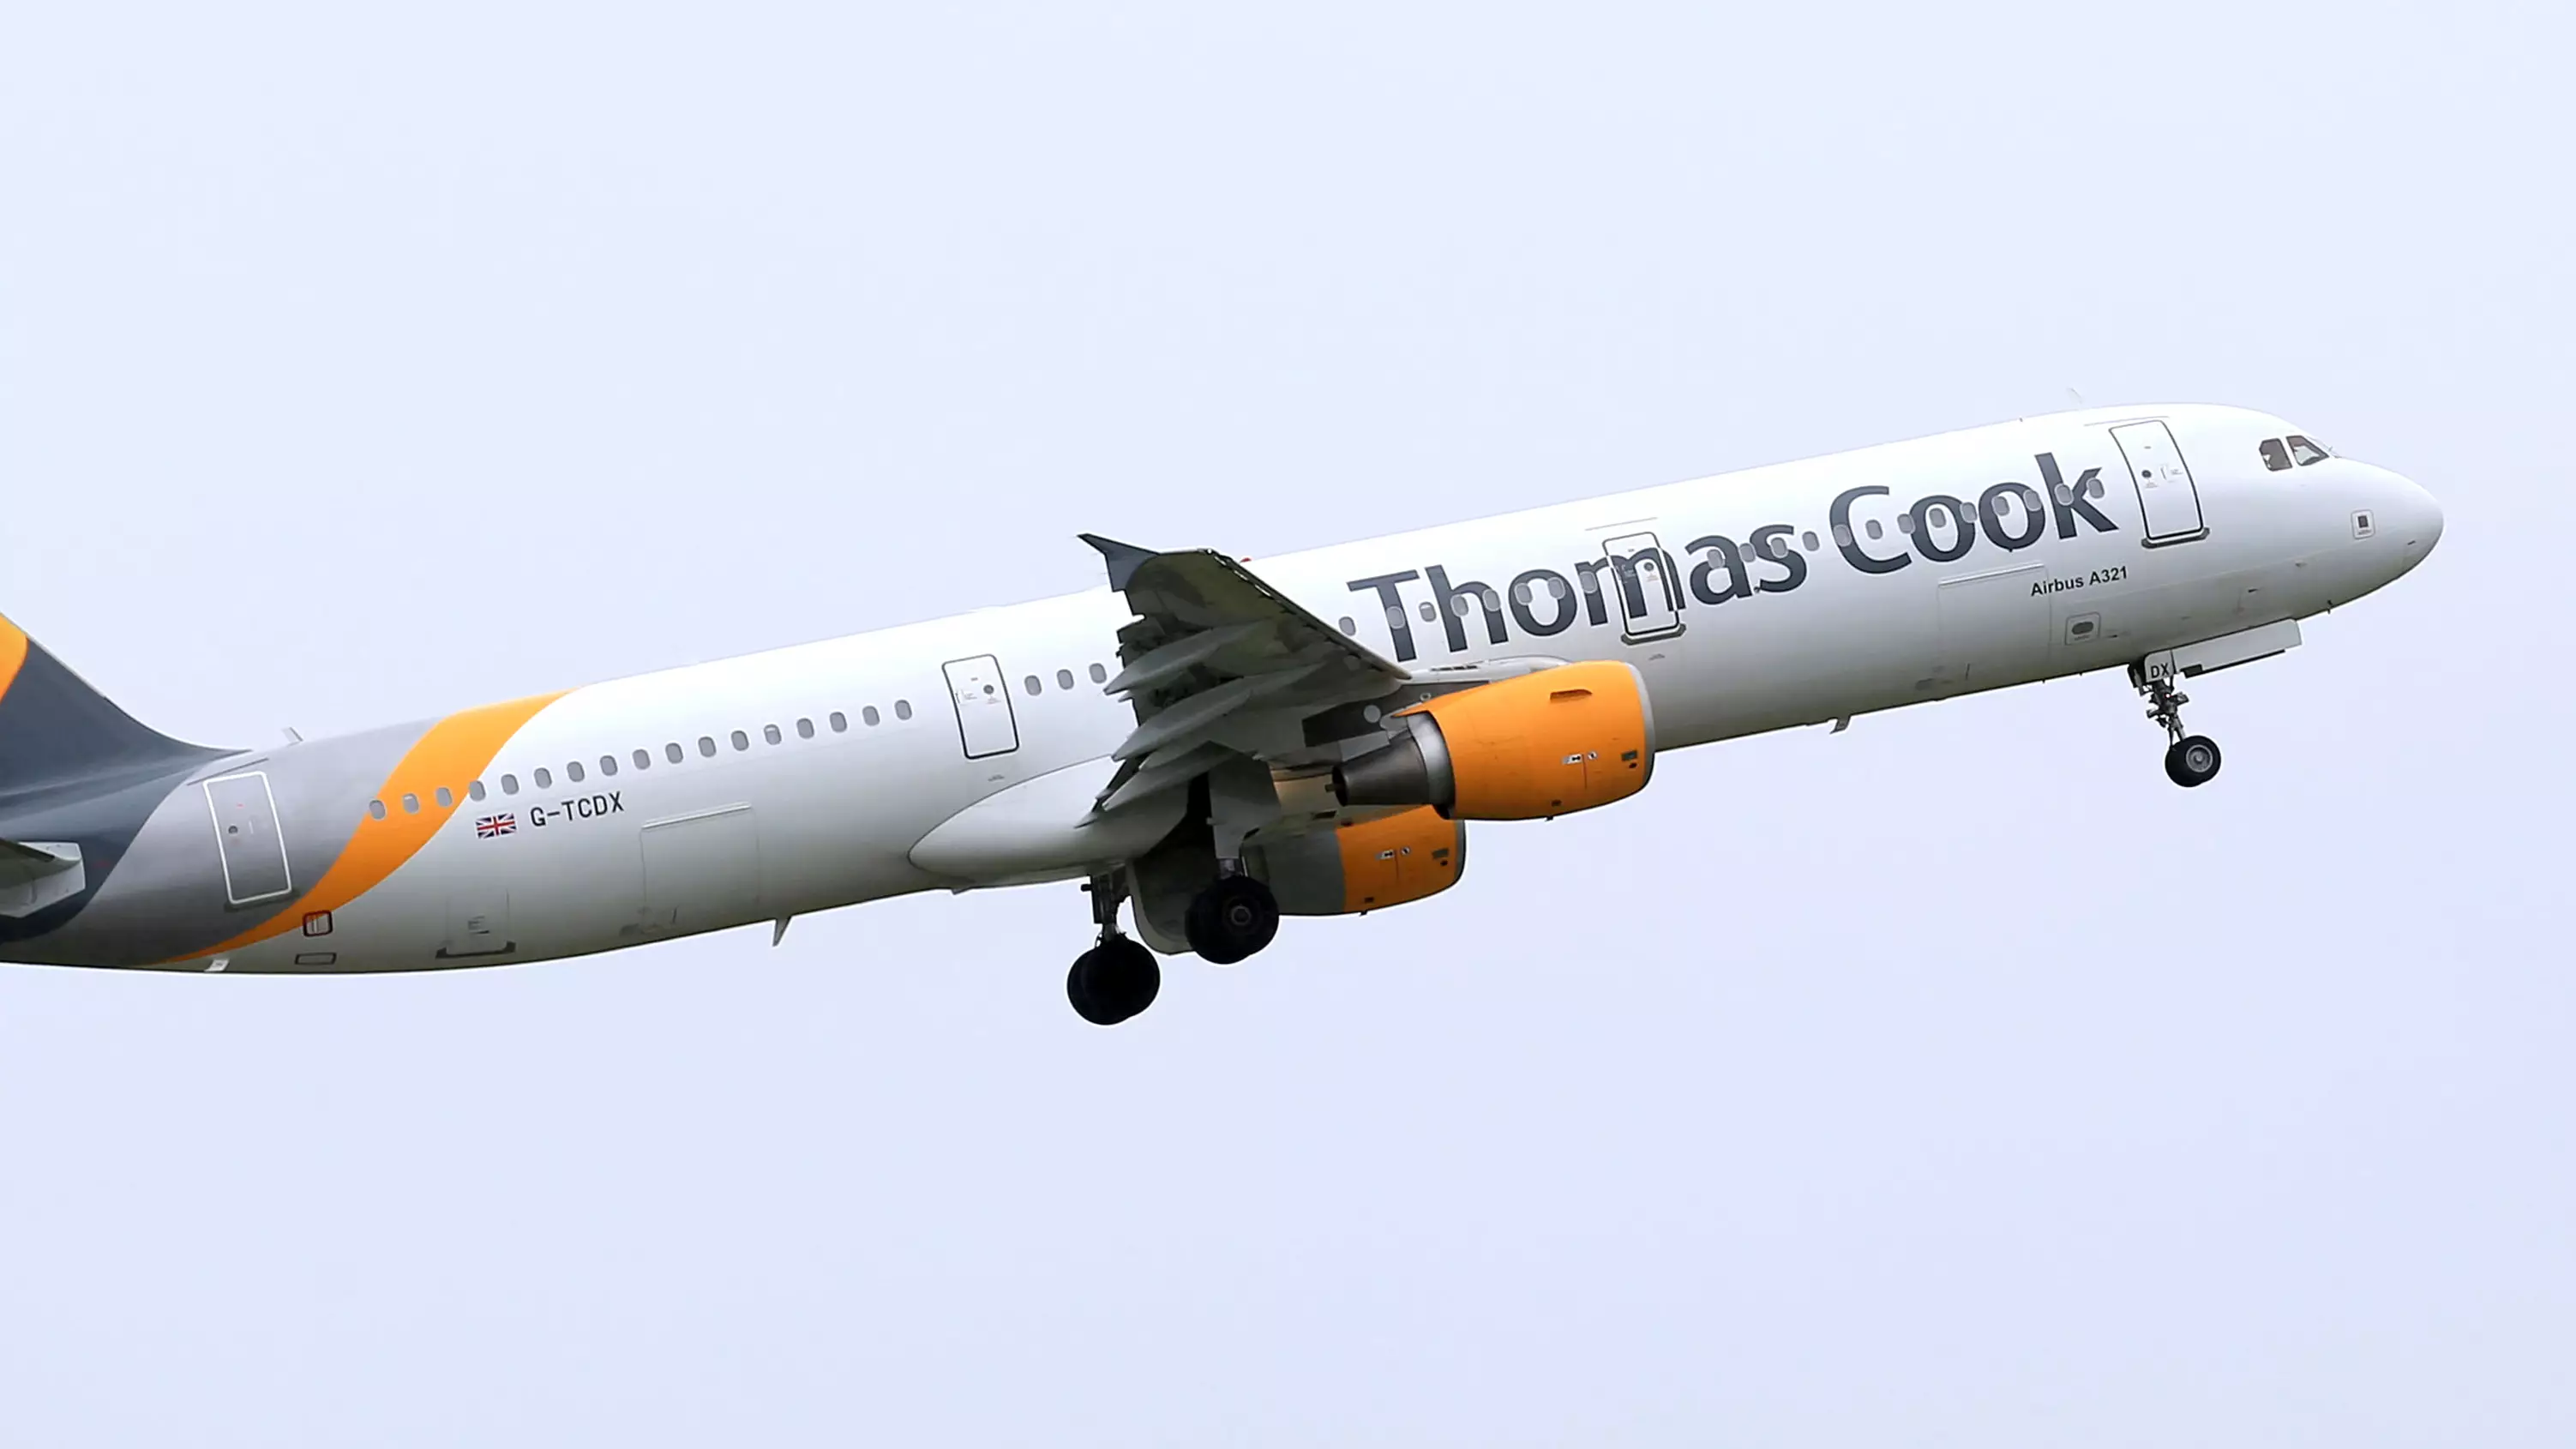 Thomas Cook On Brink Of Collapse And Could Leave 180,000 Tourists Stranded